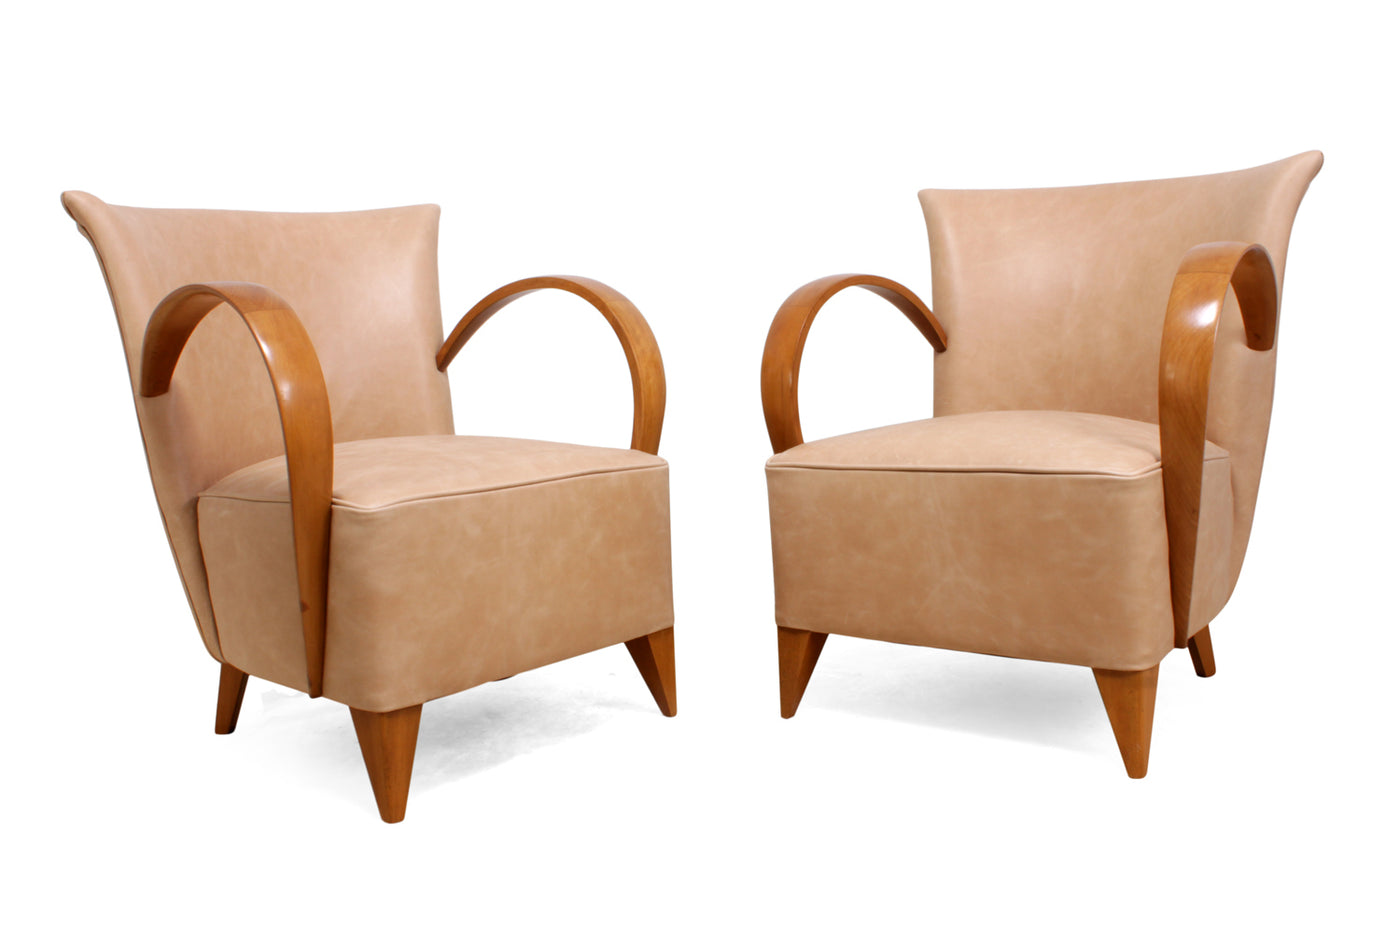 A Pair of Leather of French Art Deco Chairs c1920